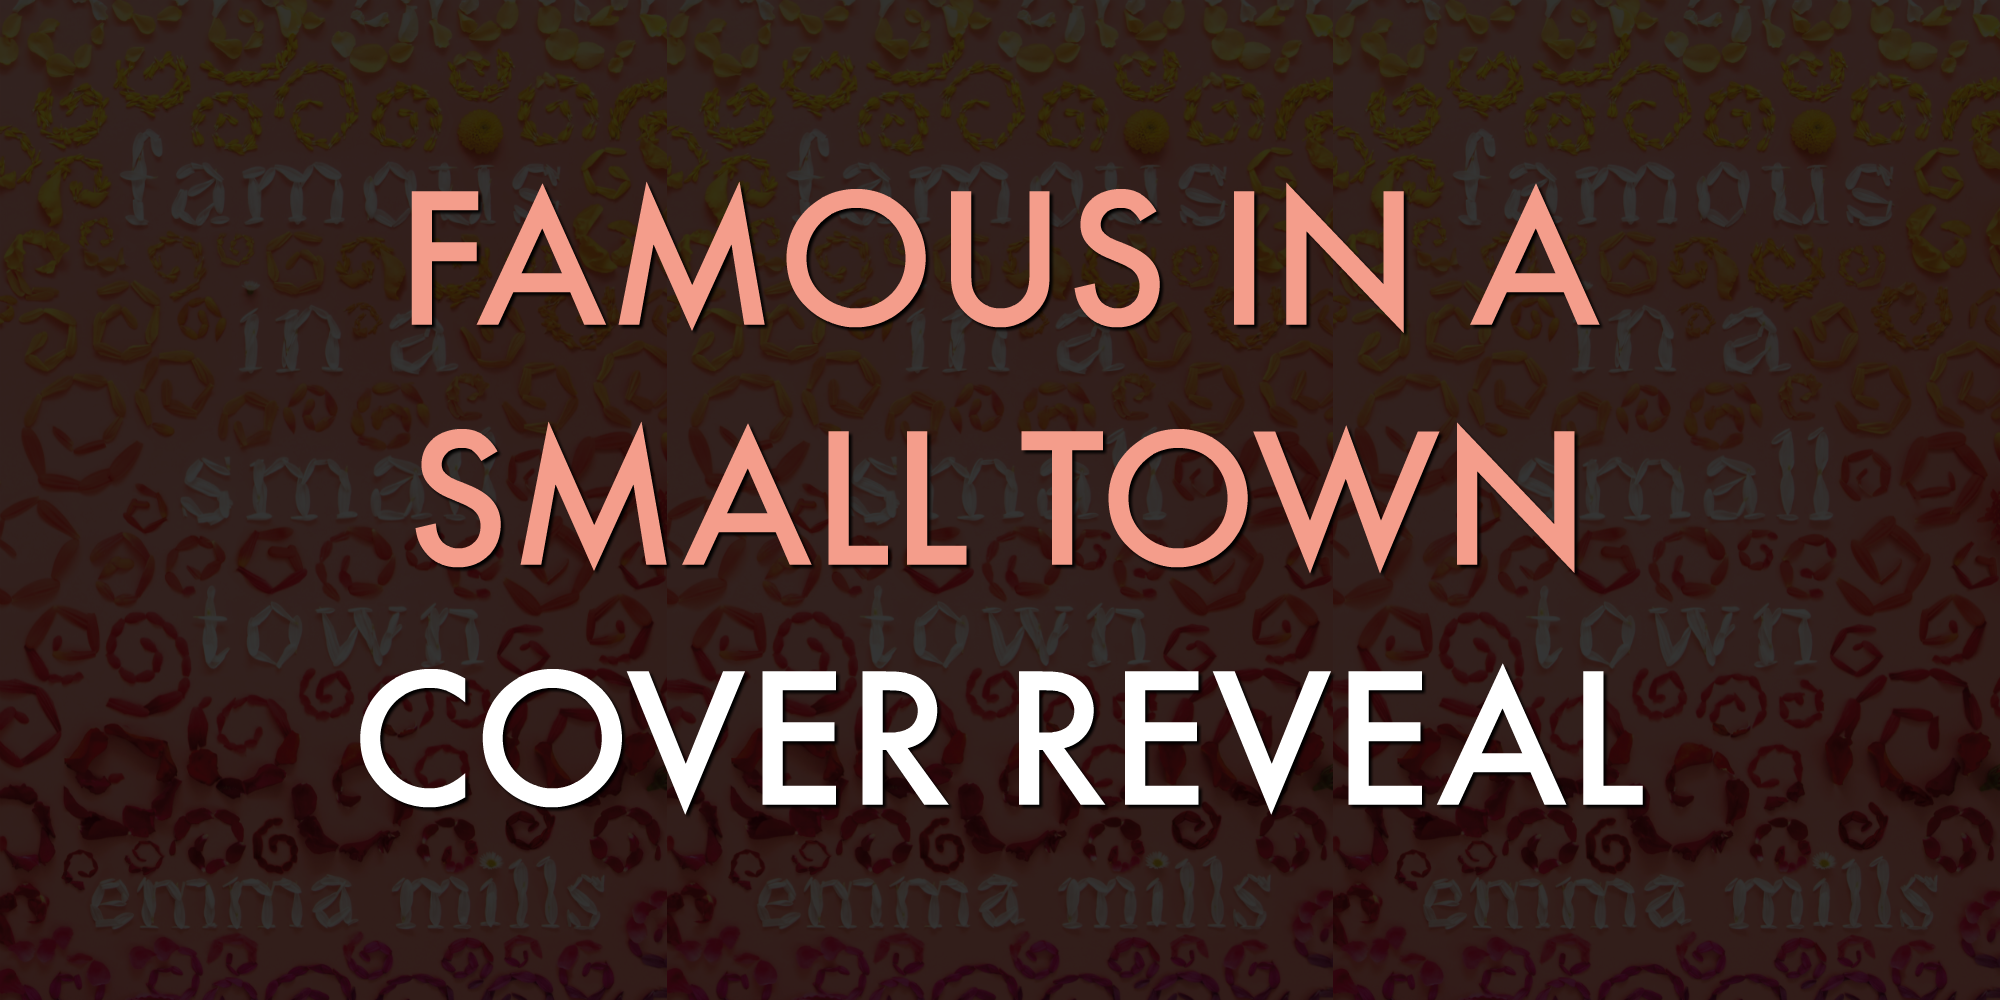 Famous in a Small Town Cover Reveal!